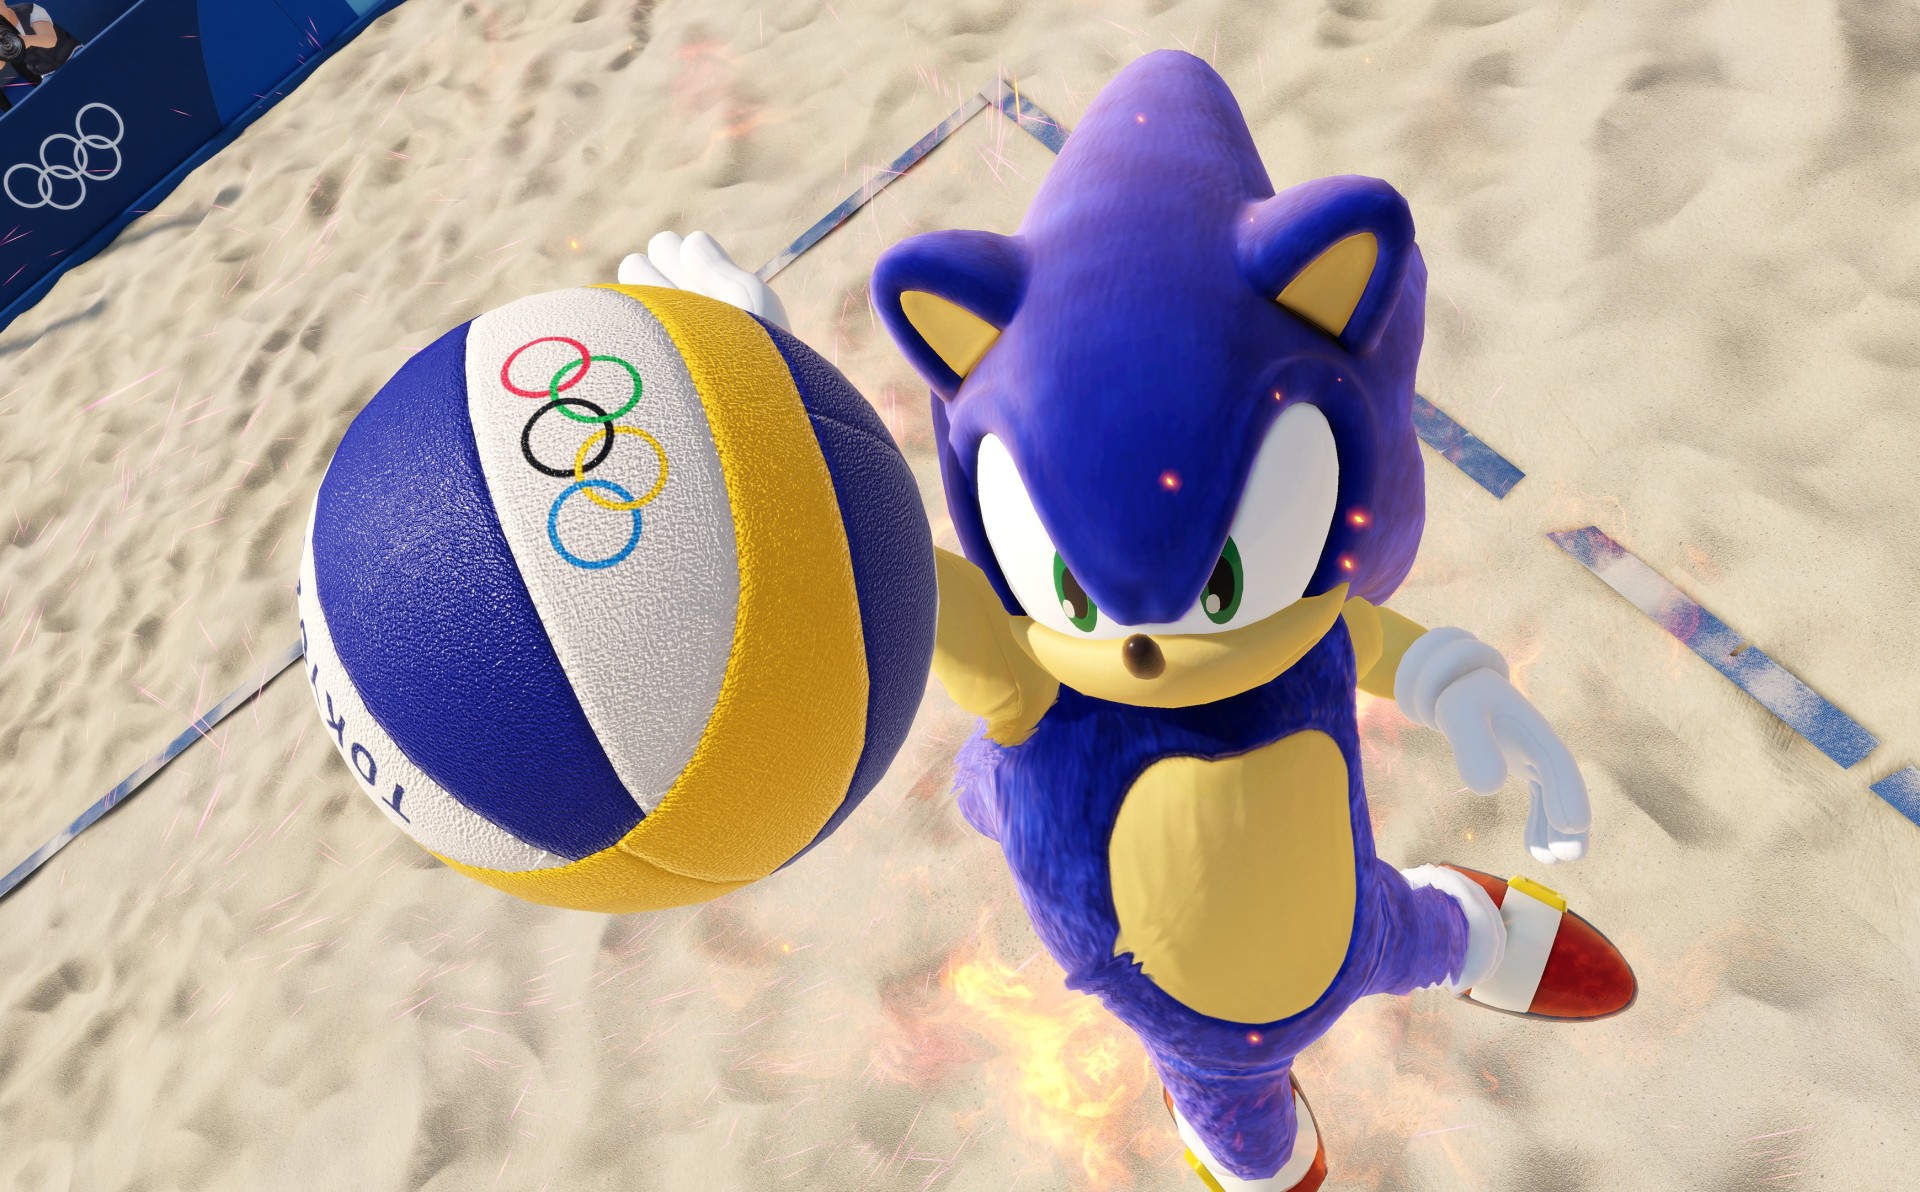 Tokyo 2020 Olympic Games - The Official Video Game - June 22nd